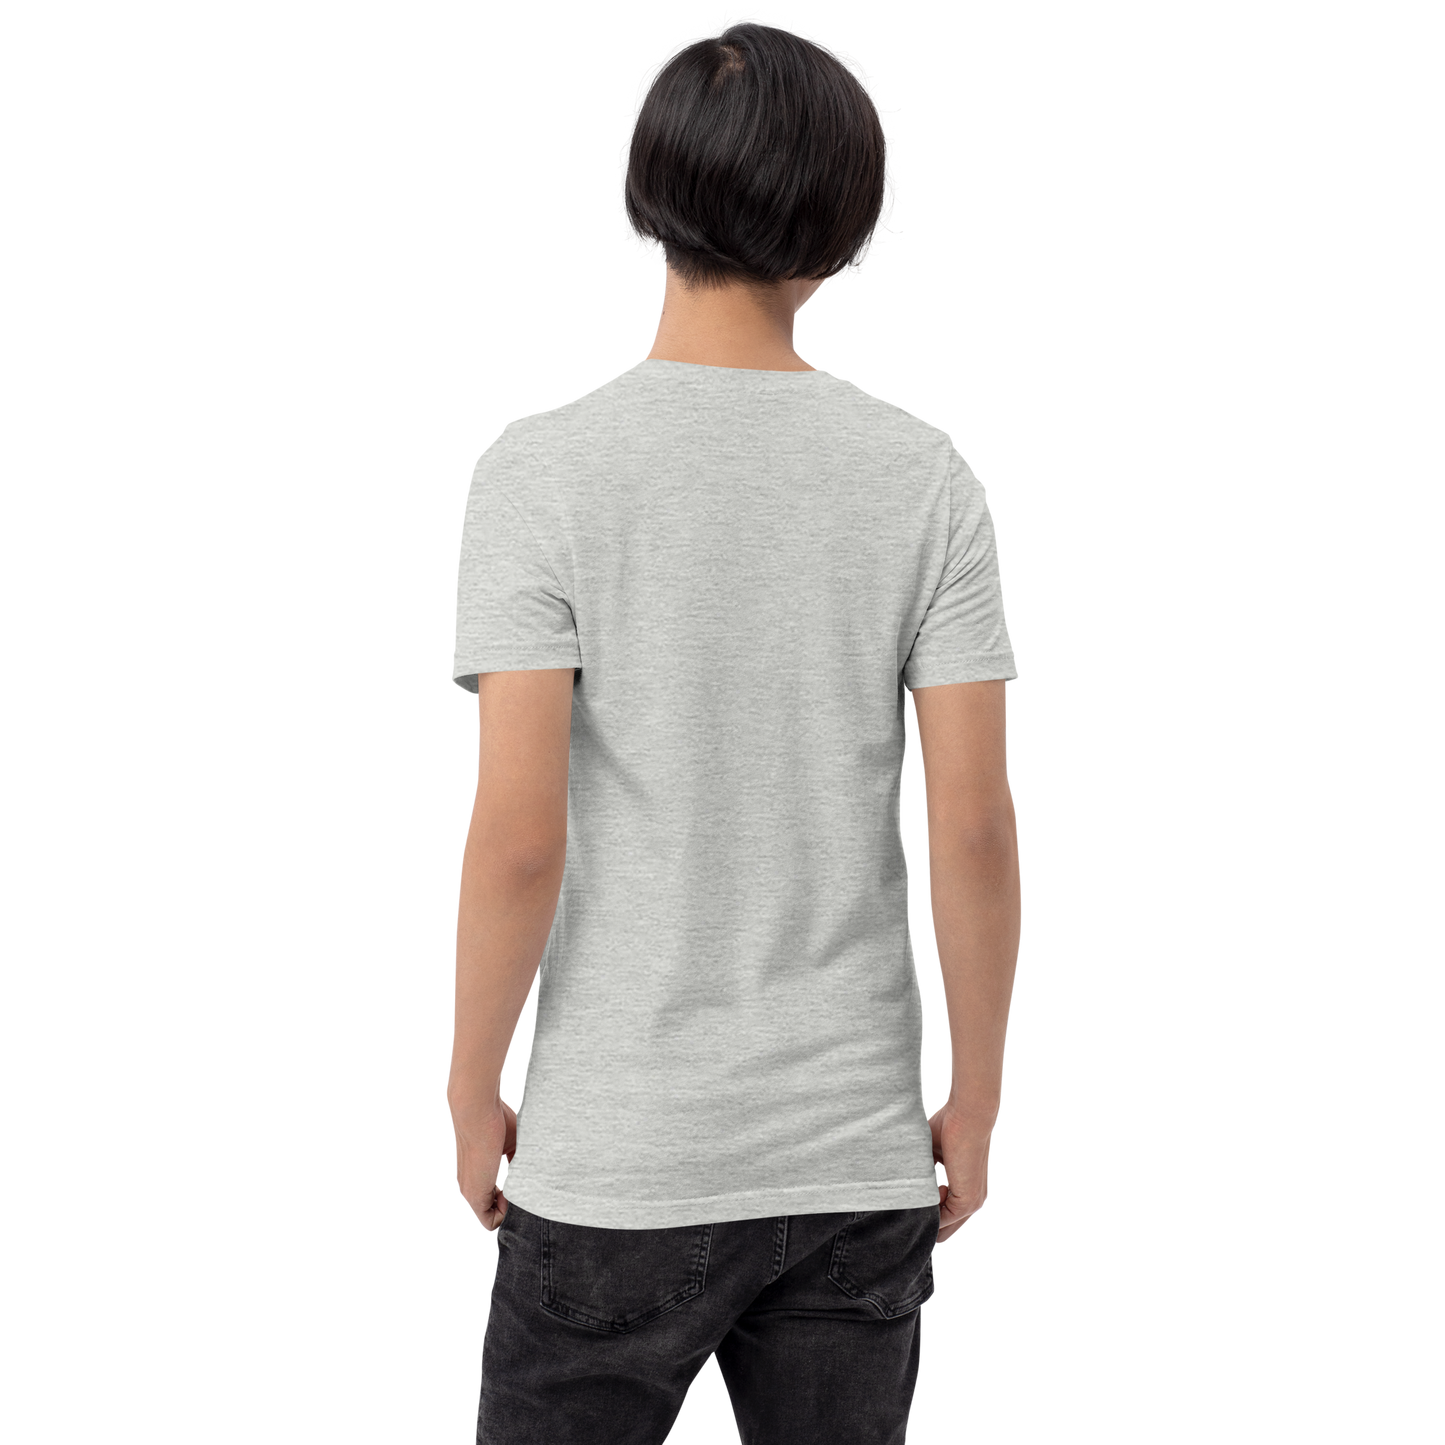 Toss Out Fear Tee - White | Grey